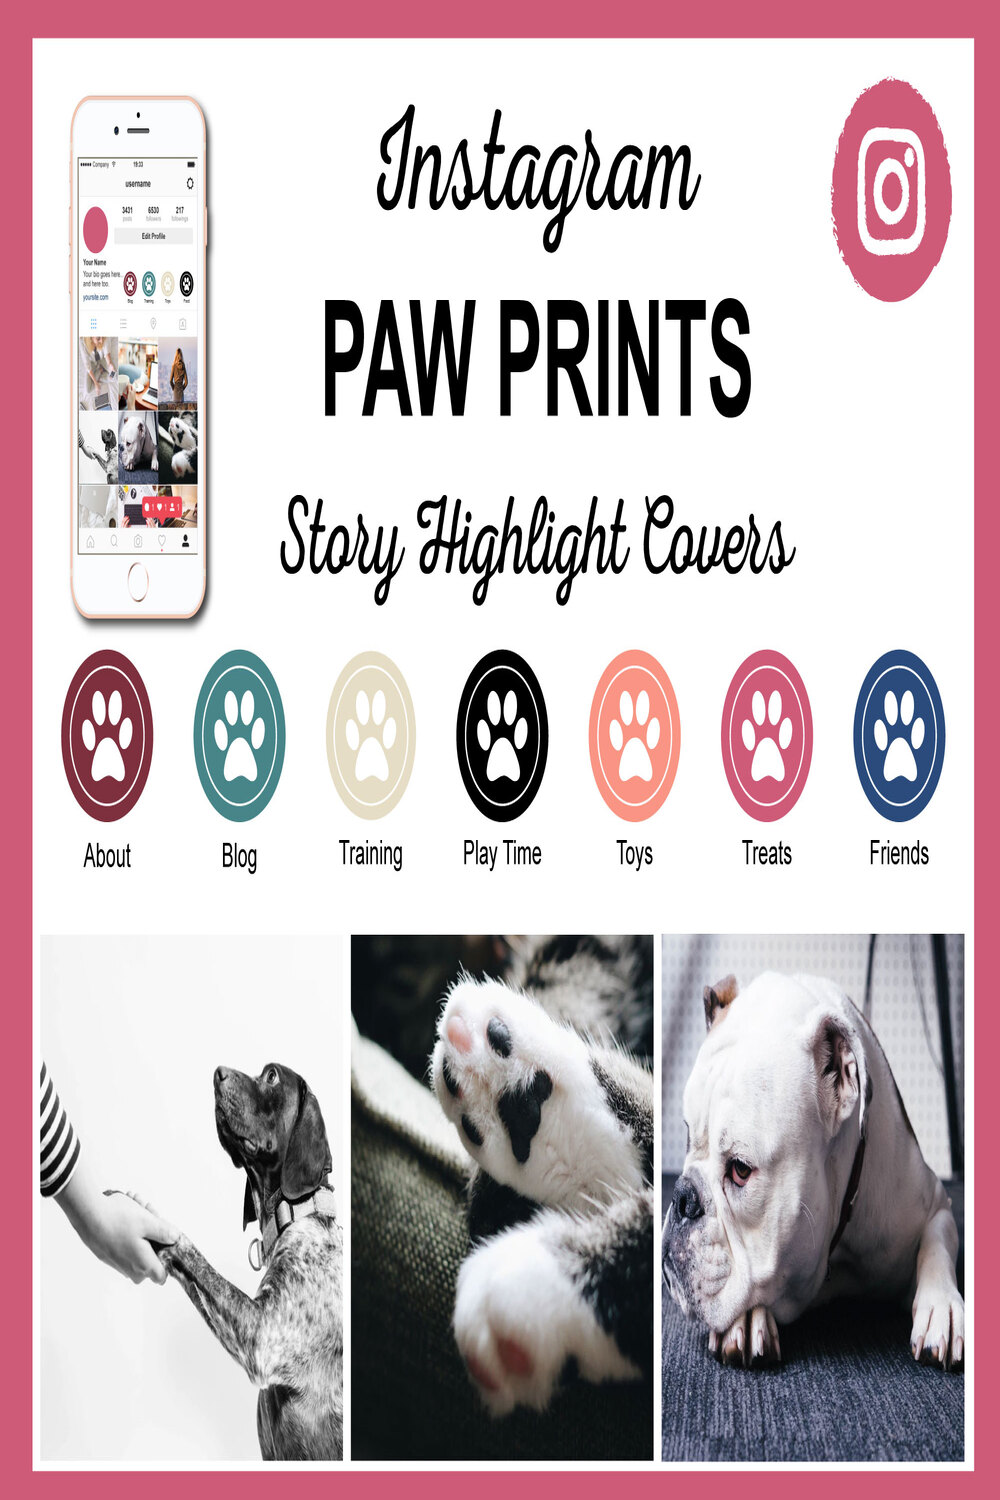 Instagram Paw Prints Story Highlight Covers pinterest image.